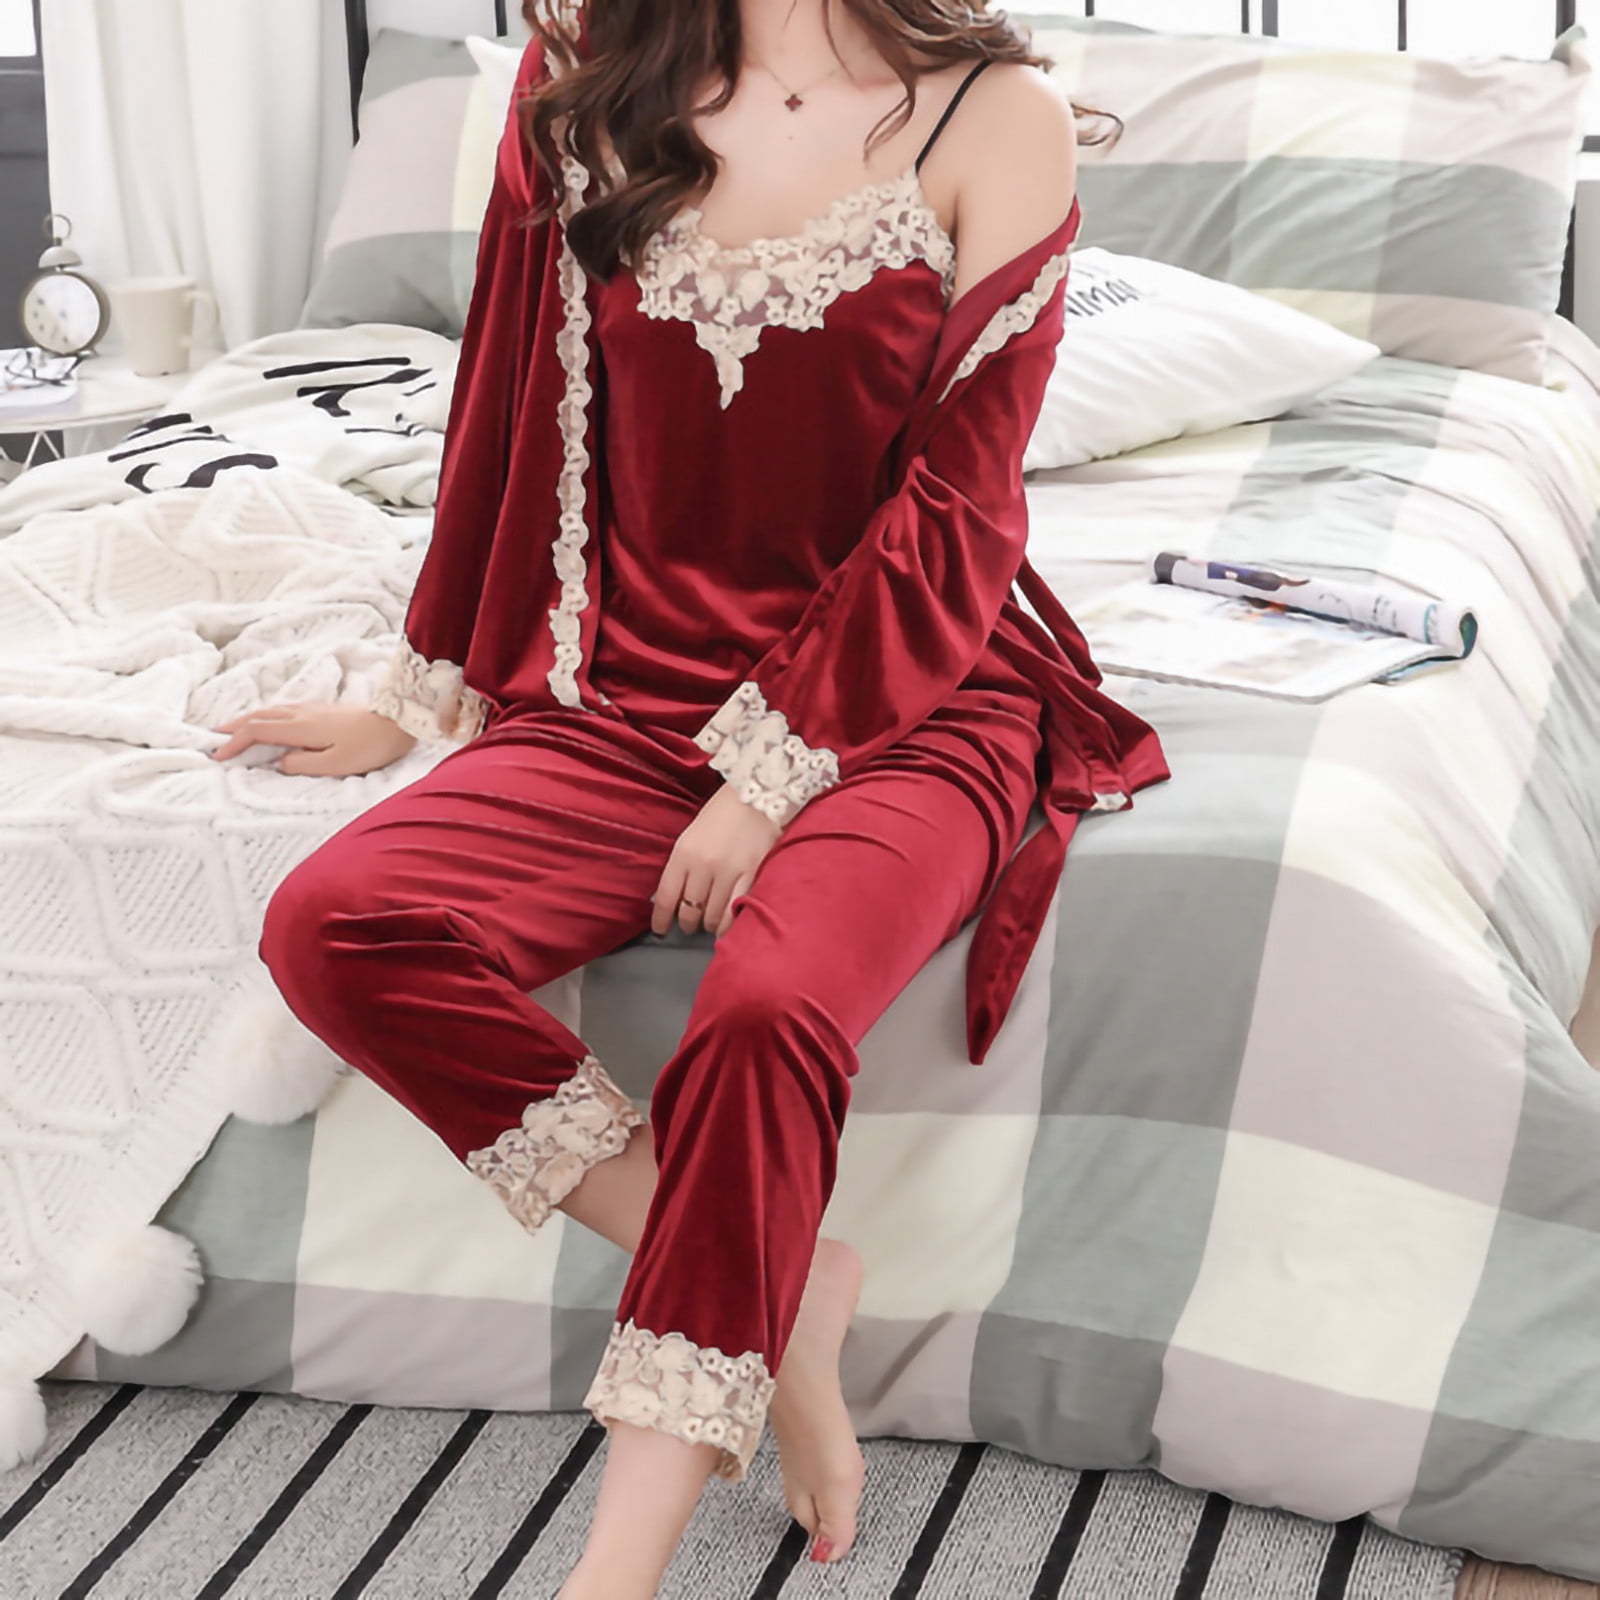  STJDM Nightgown,Winter Red Blue Women's Sleep Pajama Sets  Sleepwear Nightwear Suits Lace Plus Size 2 Pieces Robe Gown Sets M Blue :  Clothing, Shoes & Jewelry